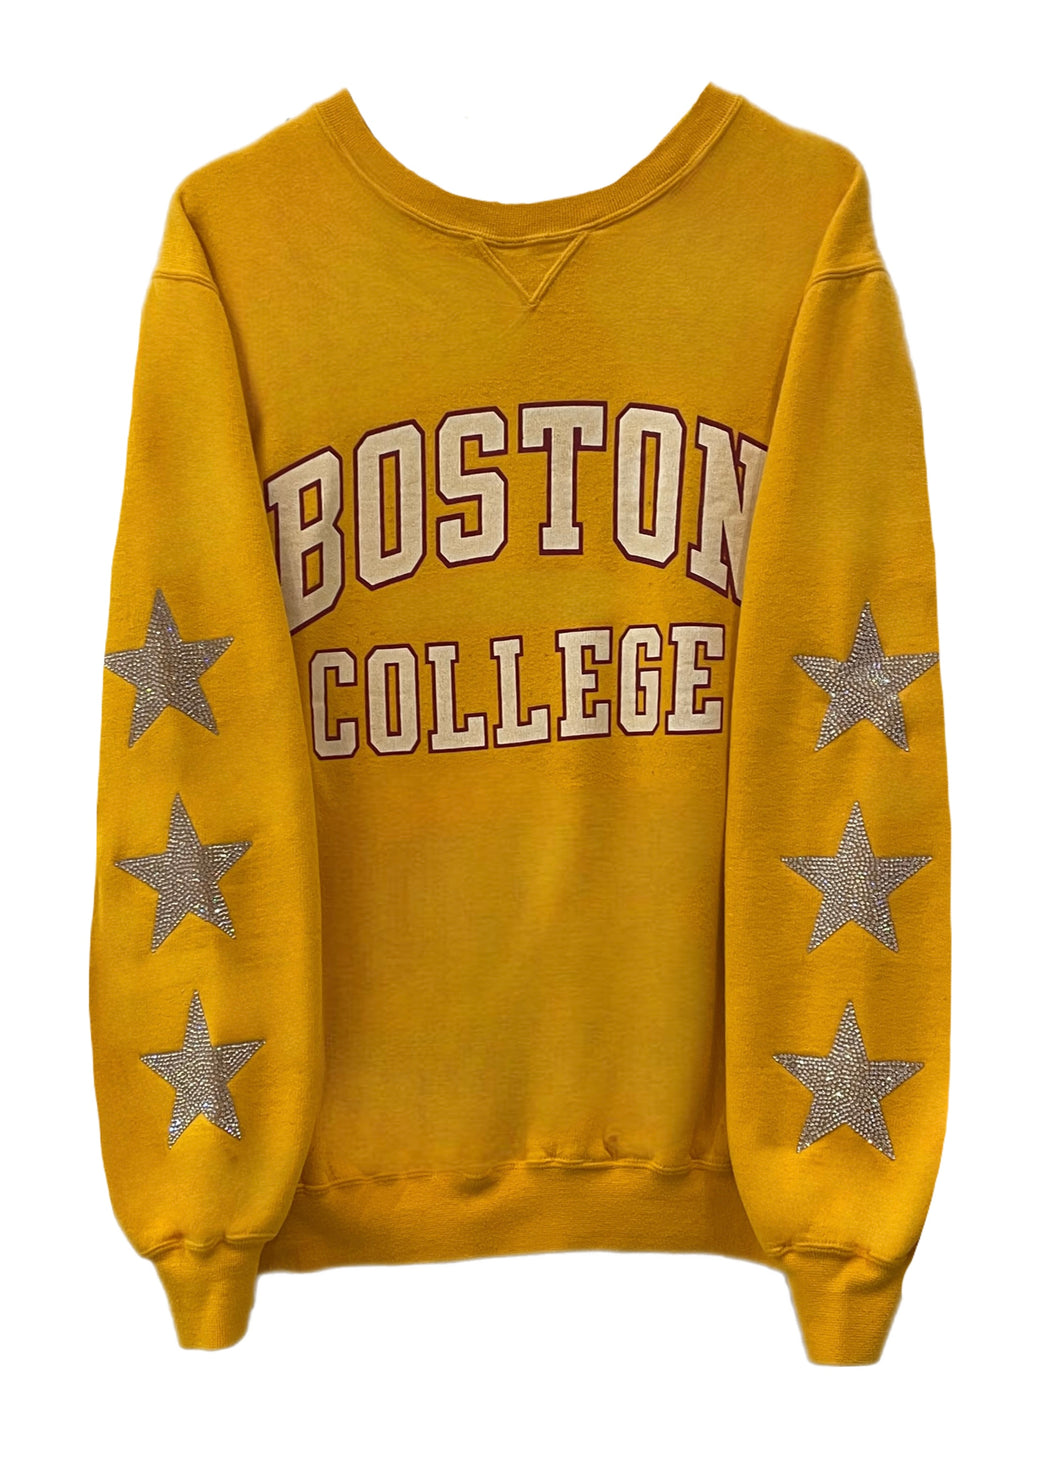 Boston College, BC One of a KIND Vintage ”Rare Find” Sweatshirt with Three Crystal Star Design.